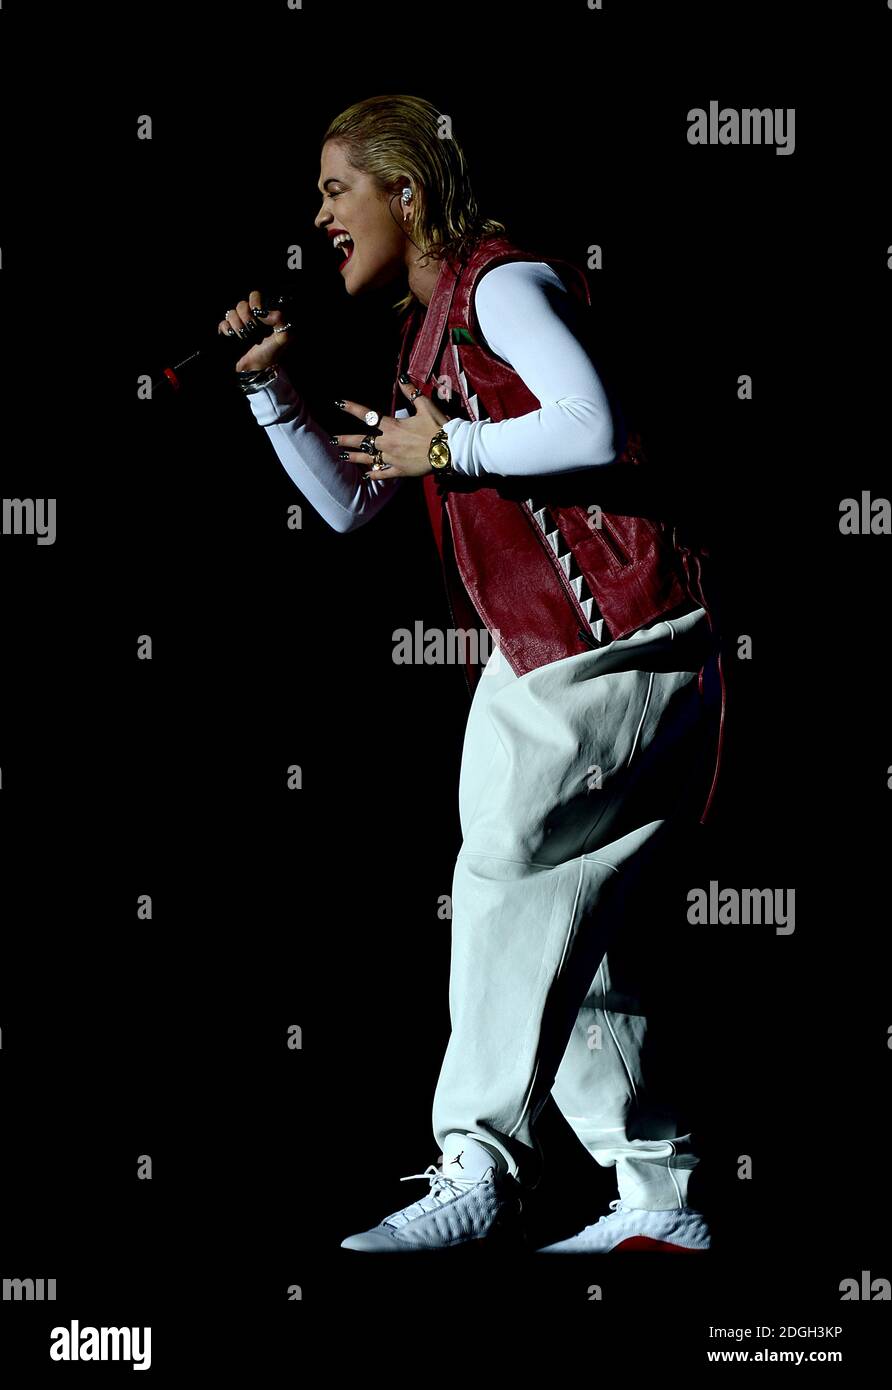 Rita Ora on stage during the 2012 Capital FM Jingle Bell Ball at the O2 Arena, London. Stock Photo